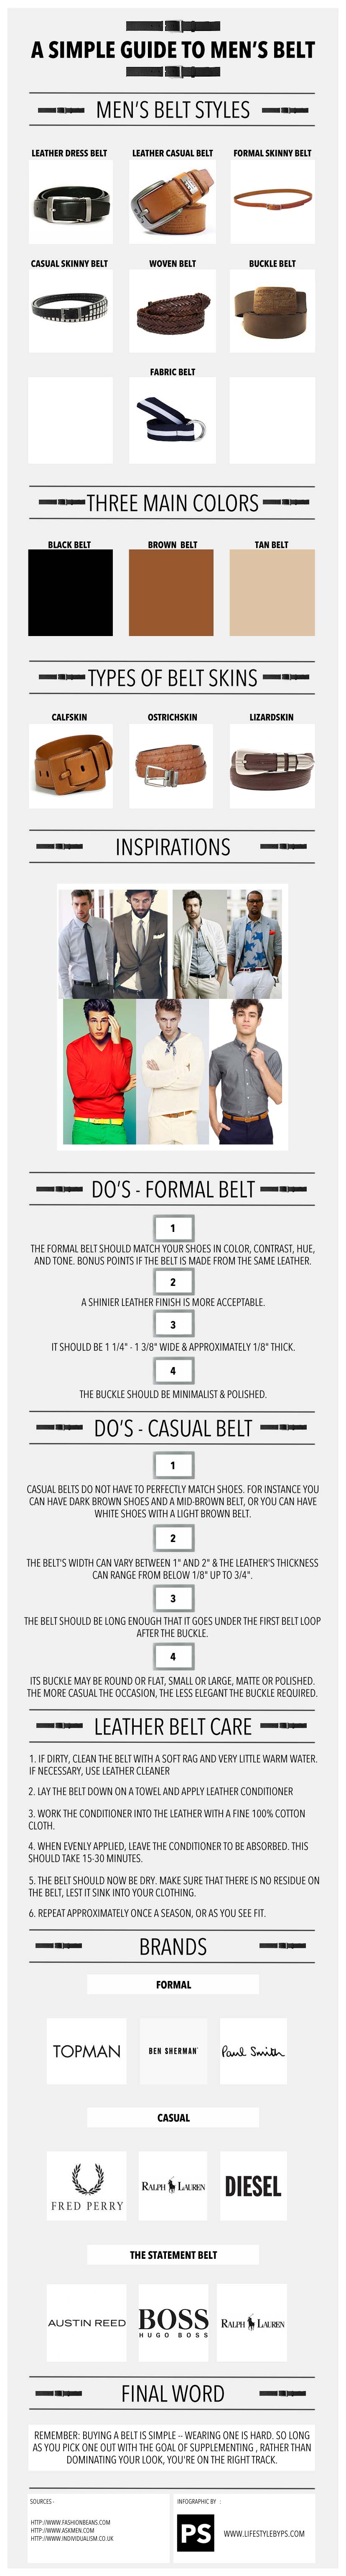 A simple guide to Men's belt